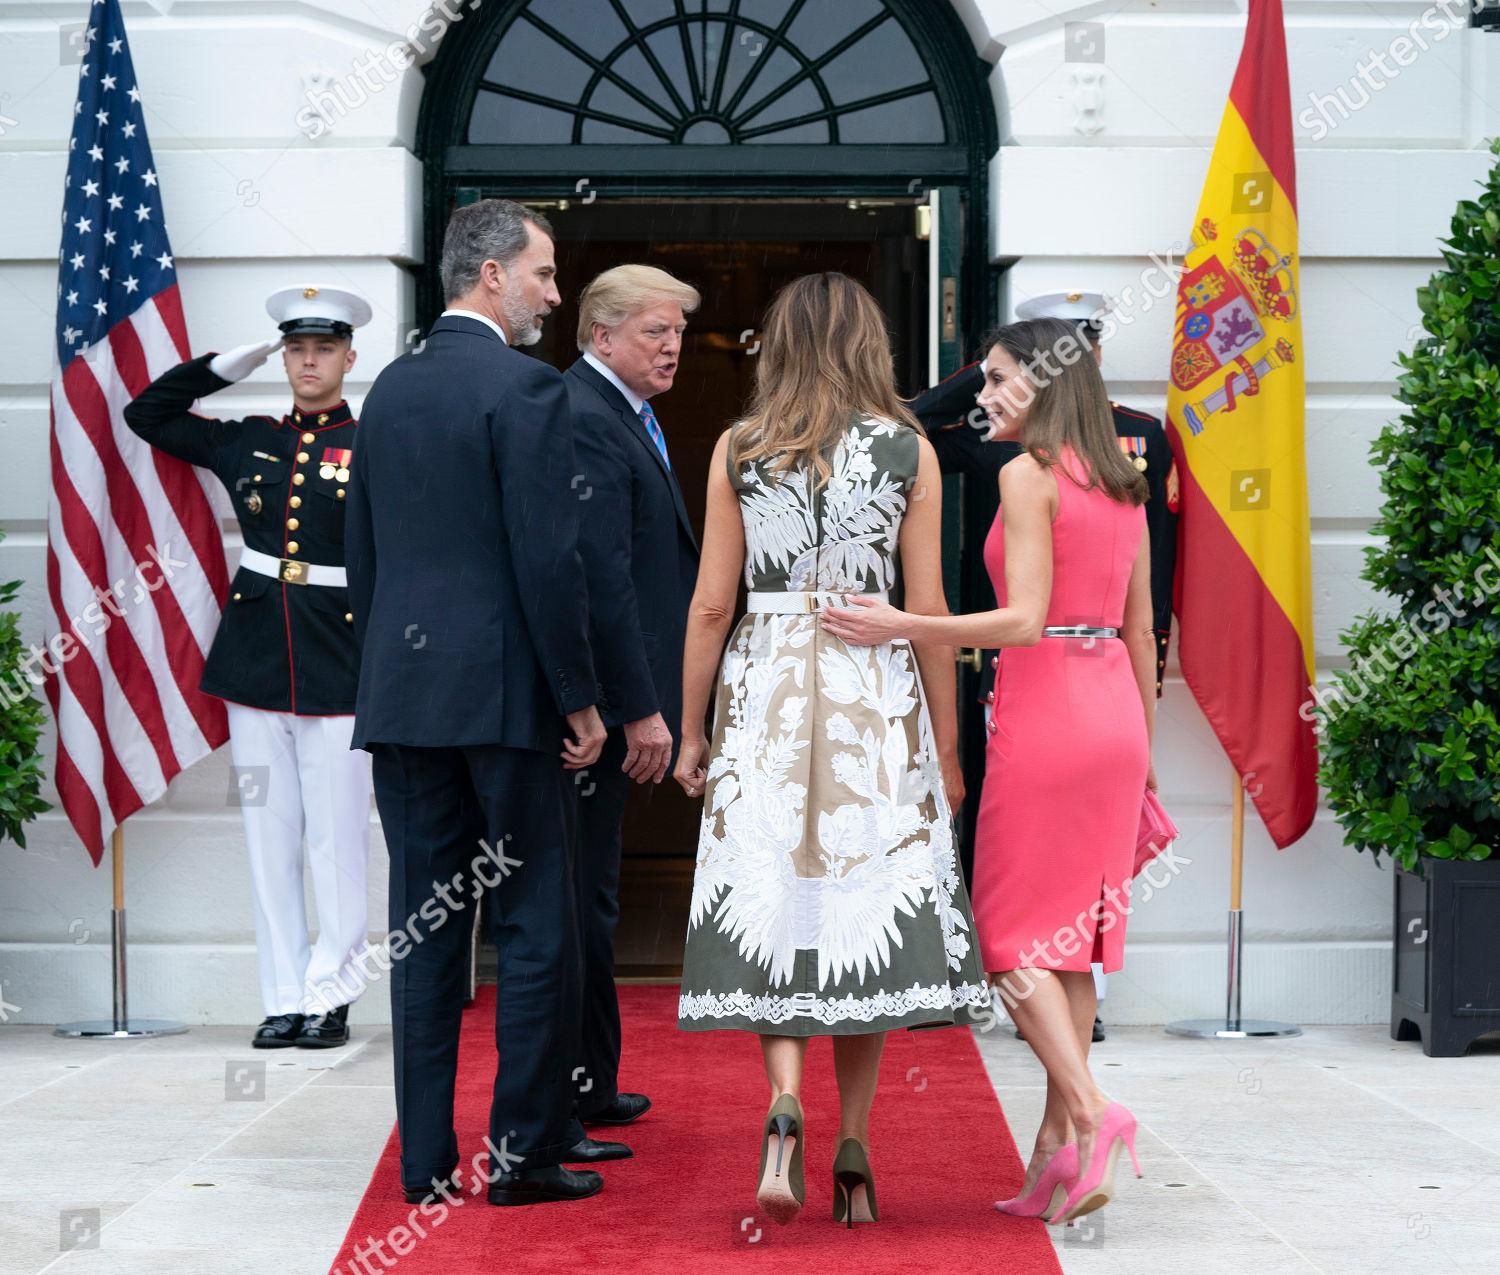 spanish-royals-visit-to-the-usa-shutterstock-editorial-9721999r.jpg